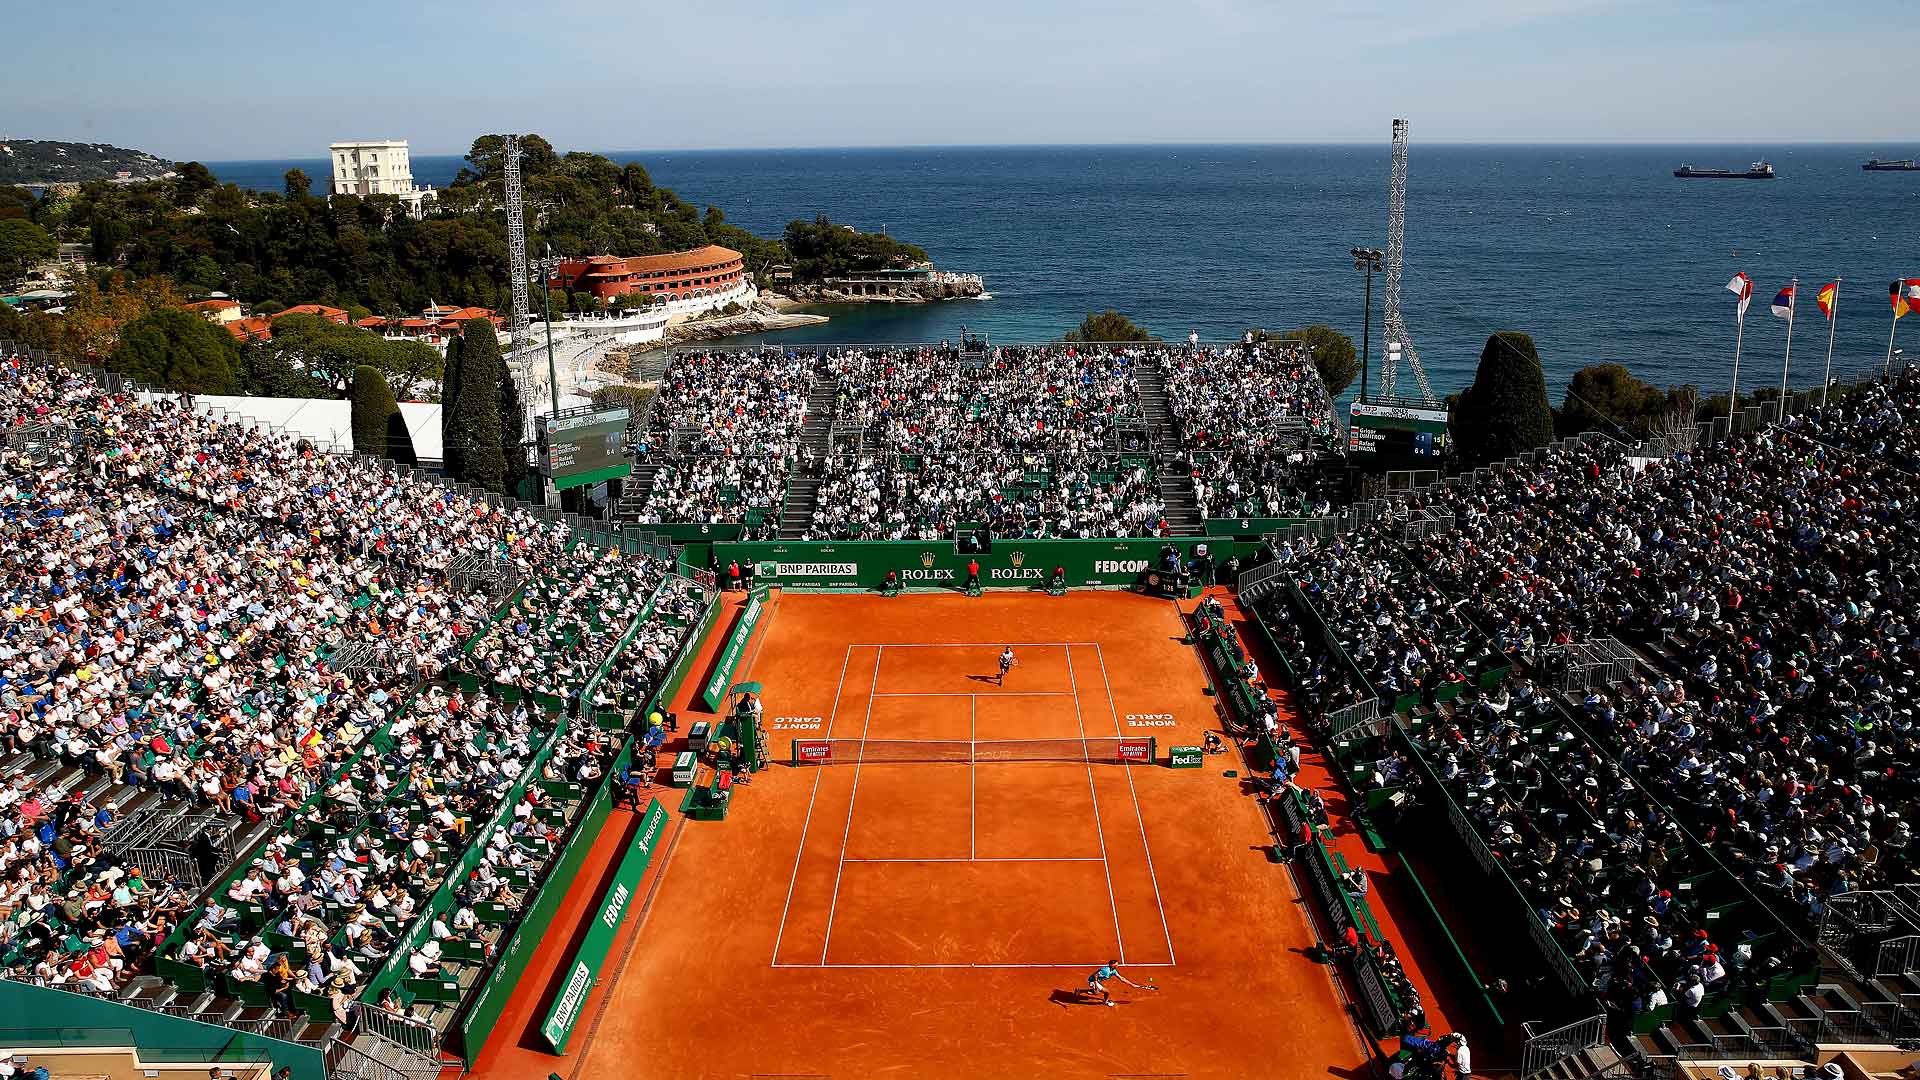 No spectators allowed at the 2021 Monte-Carlo Rolex Masters